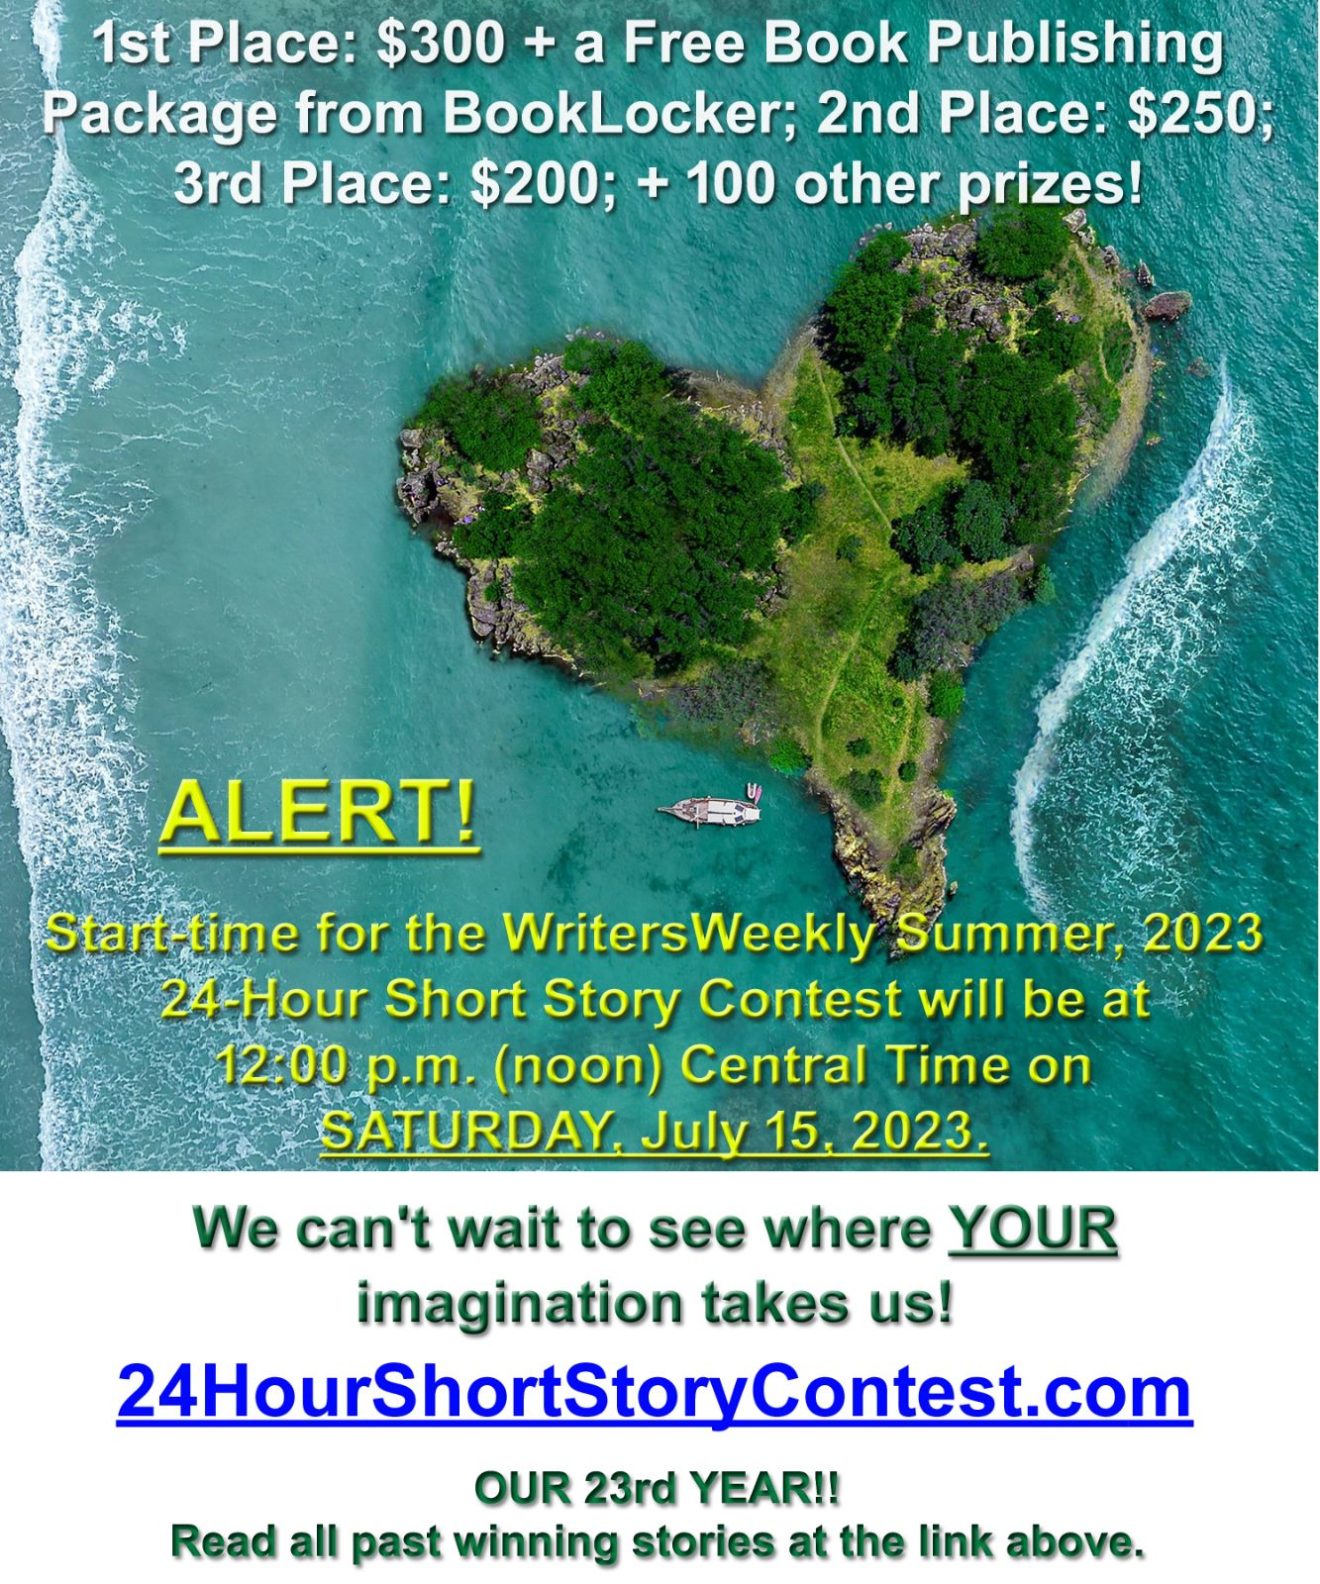 DON'T FORGET! The Summer, 2023 24-Hour Short Story Contest is ONLY A WEEK AWAY!